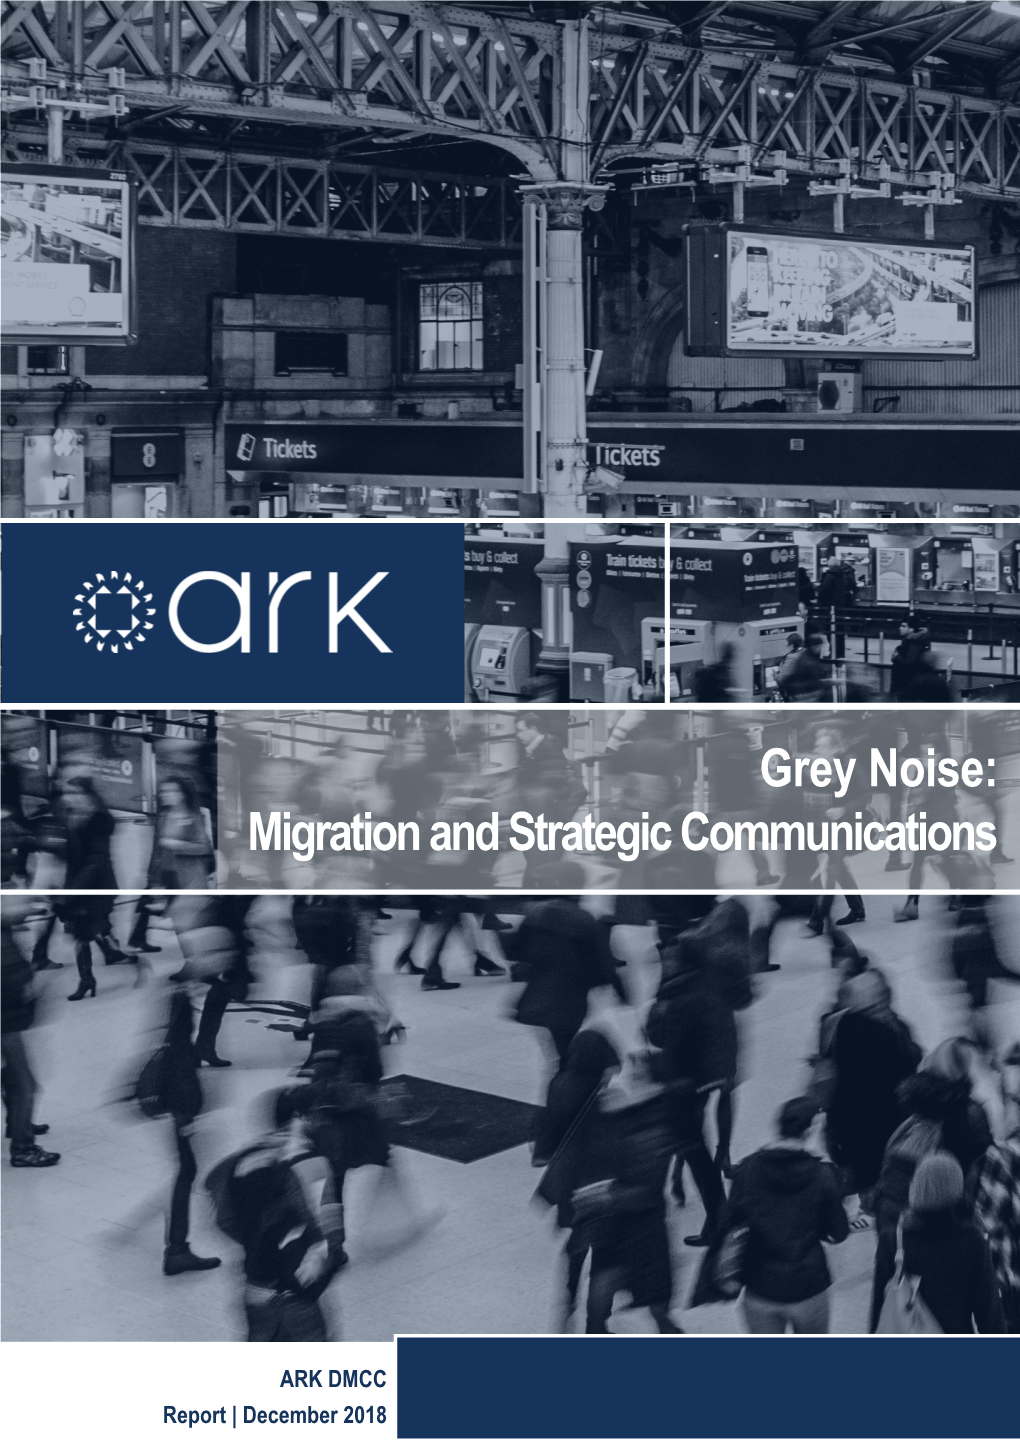 Grey Noise: Migration and Strategic Communications